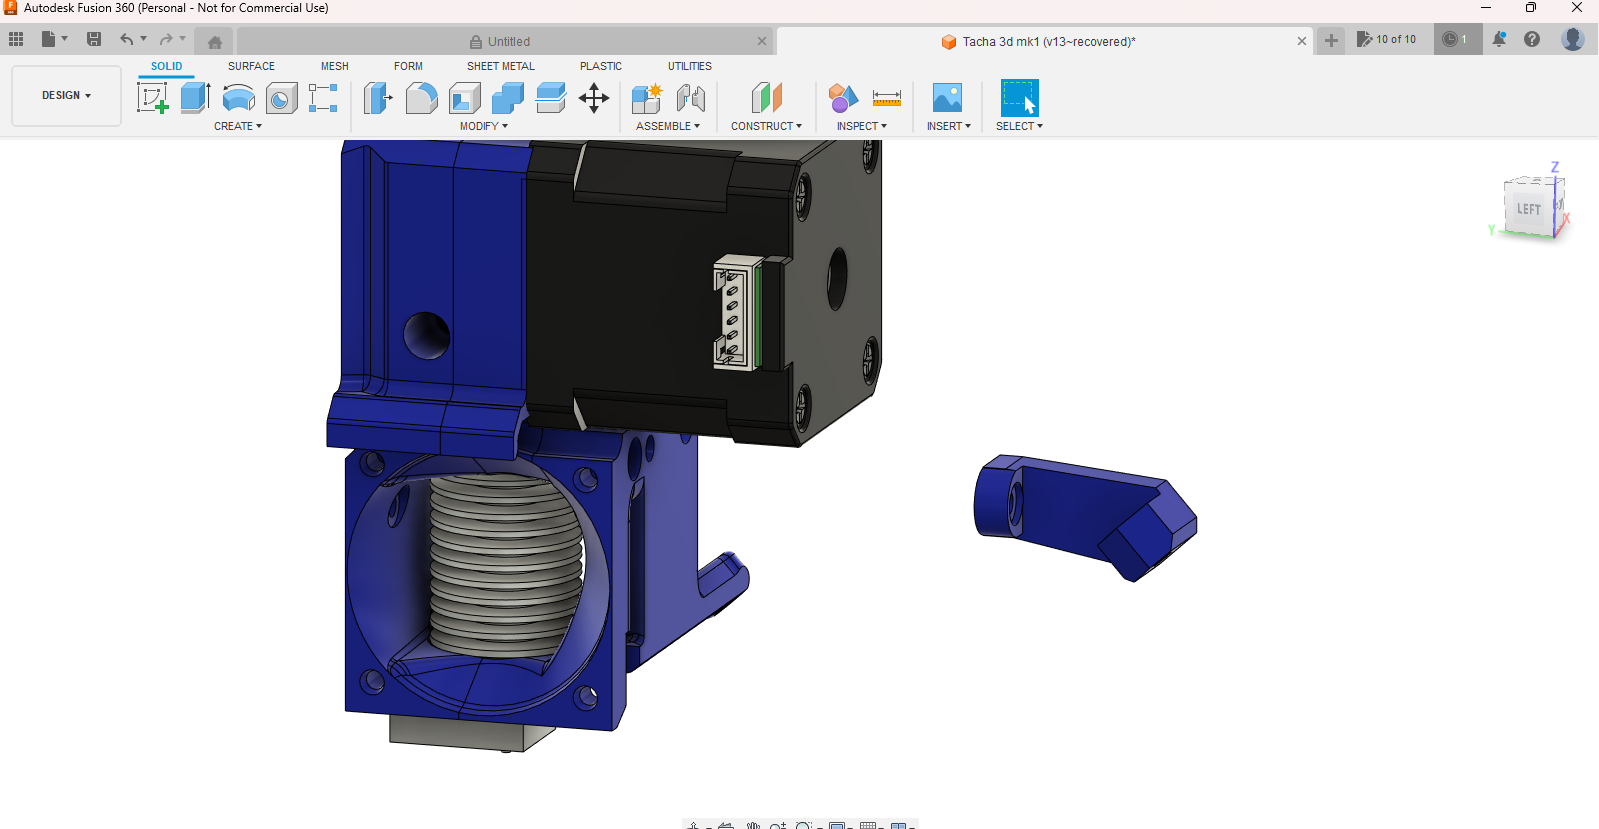 Autodesk Fusion 360 (Personal - Not for Commercial Use) 6_29_2023 10_04_21 PM.png